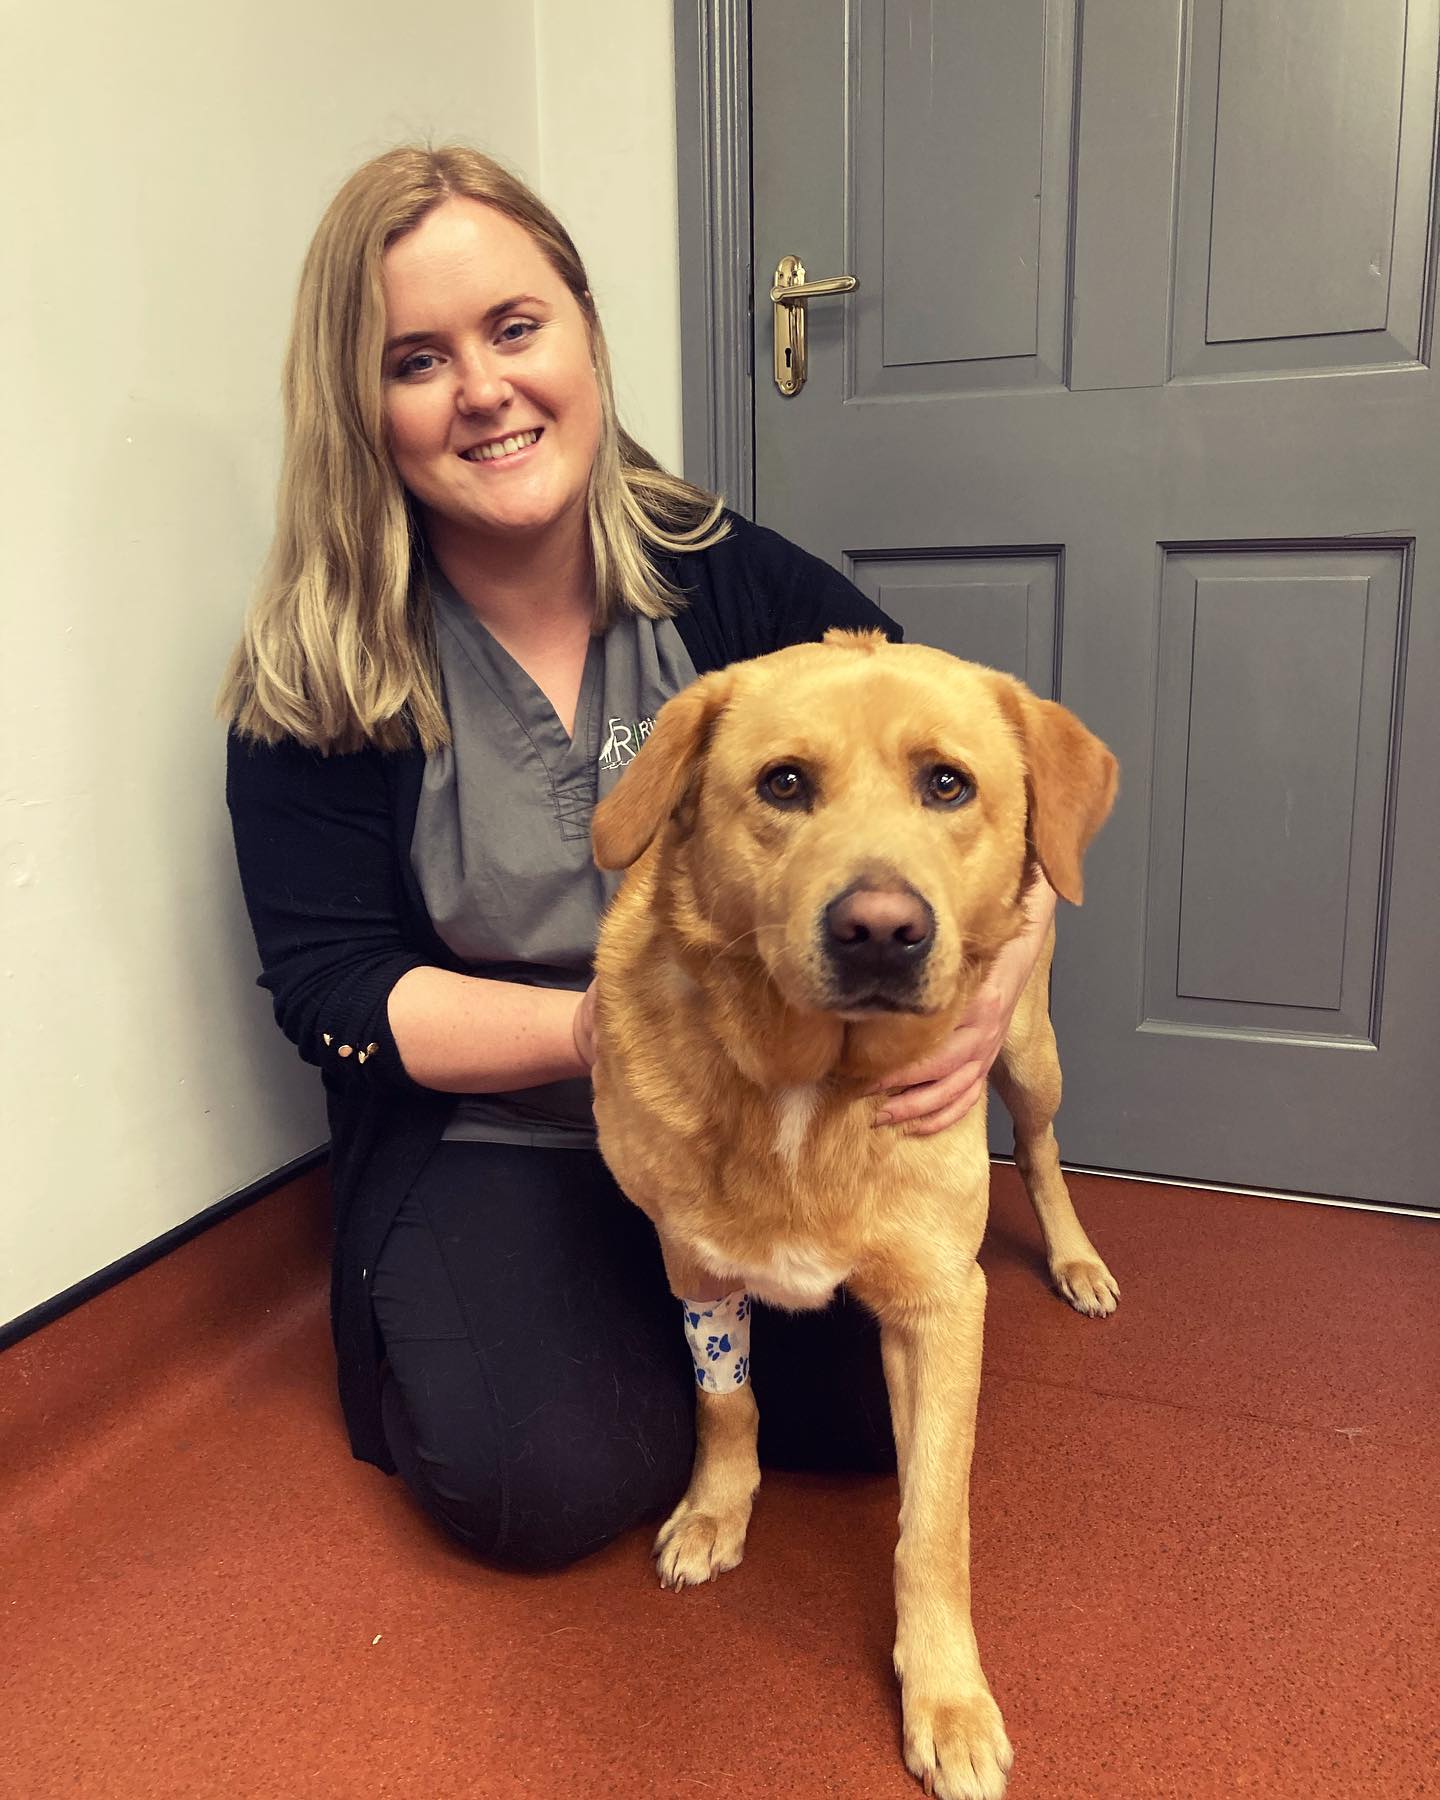 Dr Aisling O'Keeffe with canine patient - Aisling is a qualified vet working as an animal writer at The Veterinary Content Company. She specialises in proofreading and writing cat content.